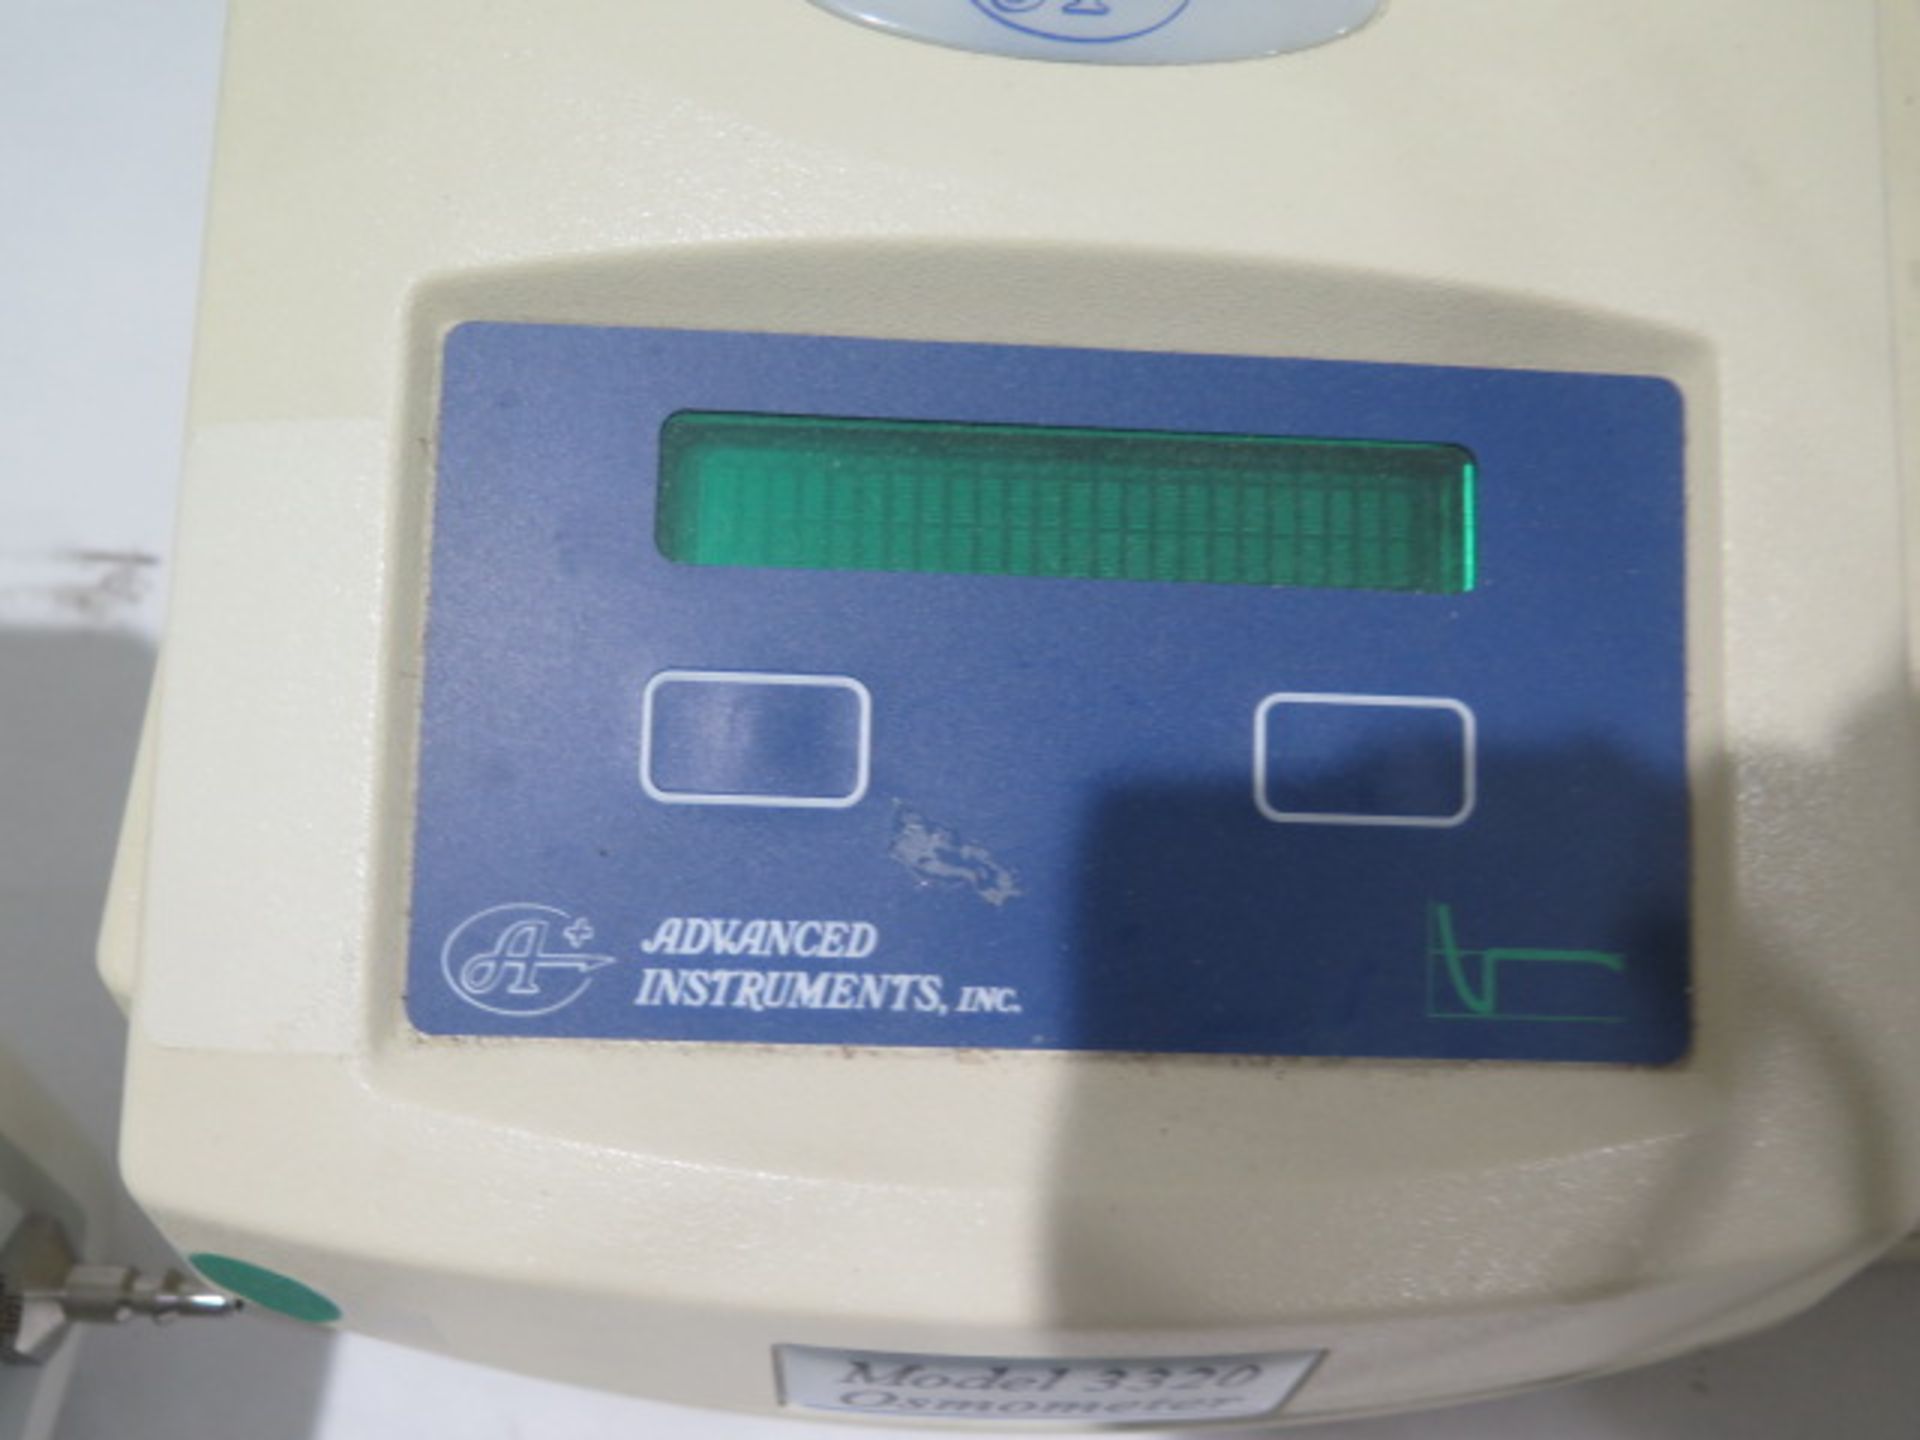 Advanced Instruments mdl. 3220 Osmometer s/n 06040381A (SOLD AS-IS - NO WARRANTY) - Image 5 of 7